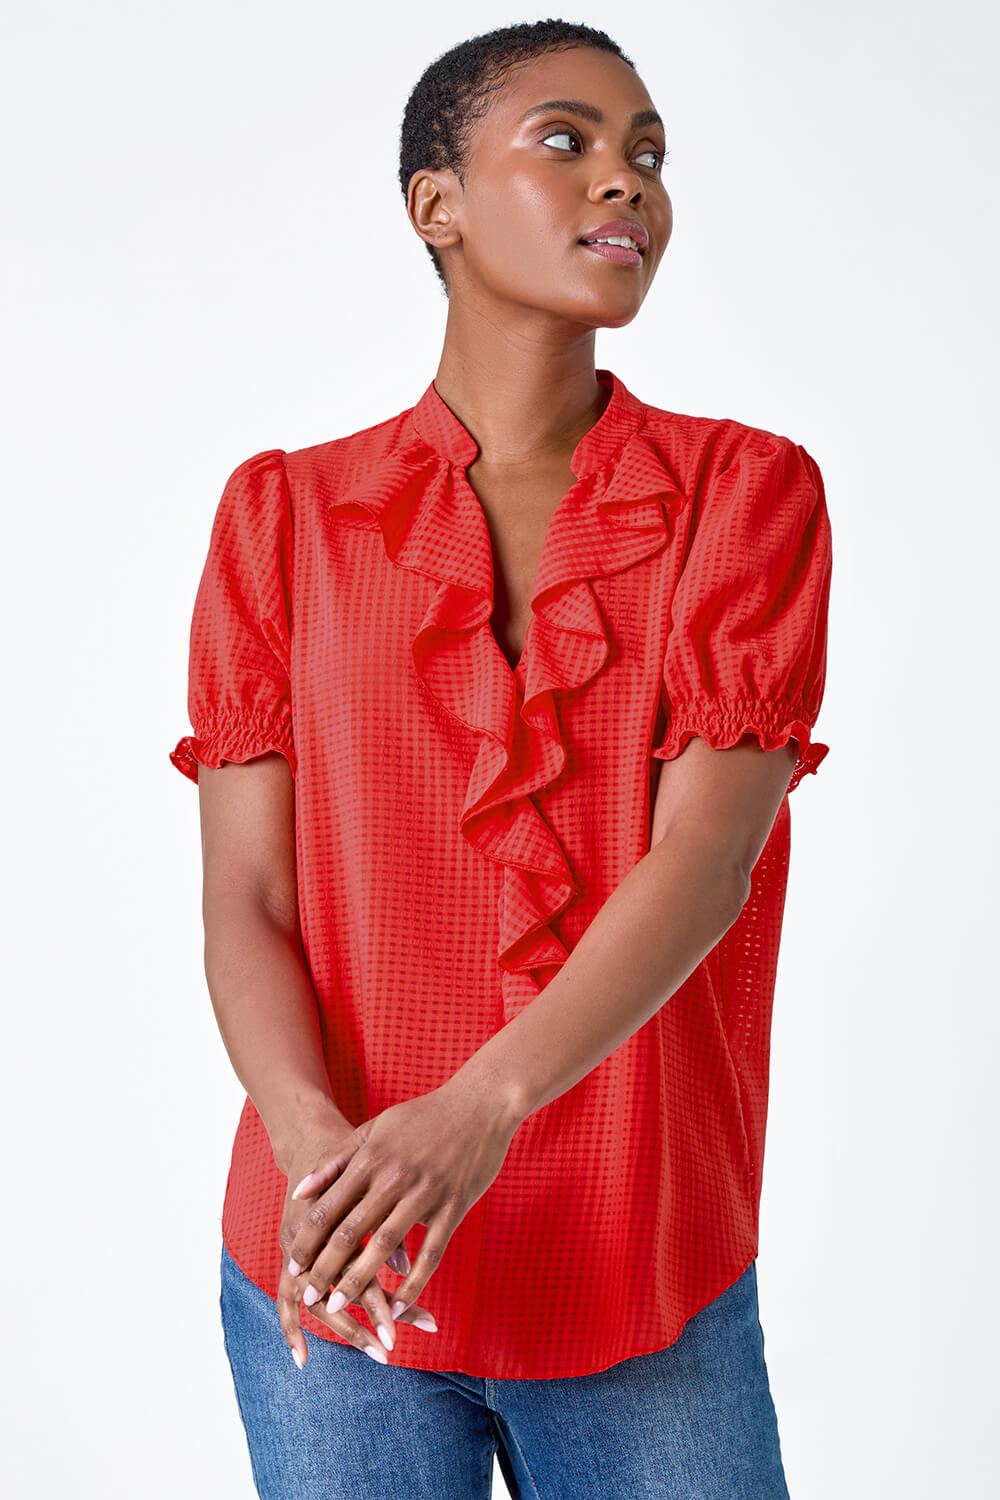 ORANGE Waffle Textured Frill Detail Top, Image 4 of 5